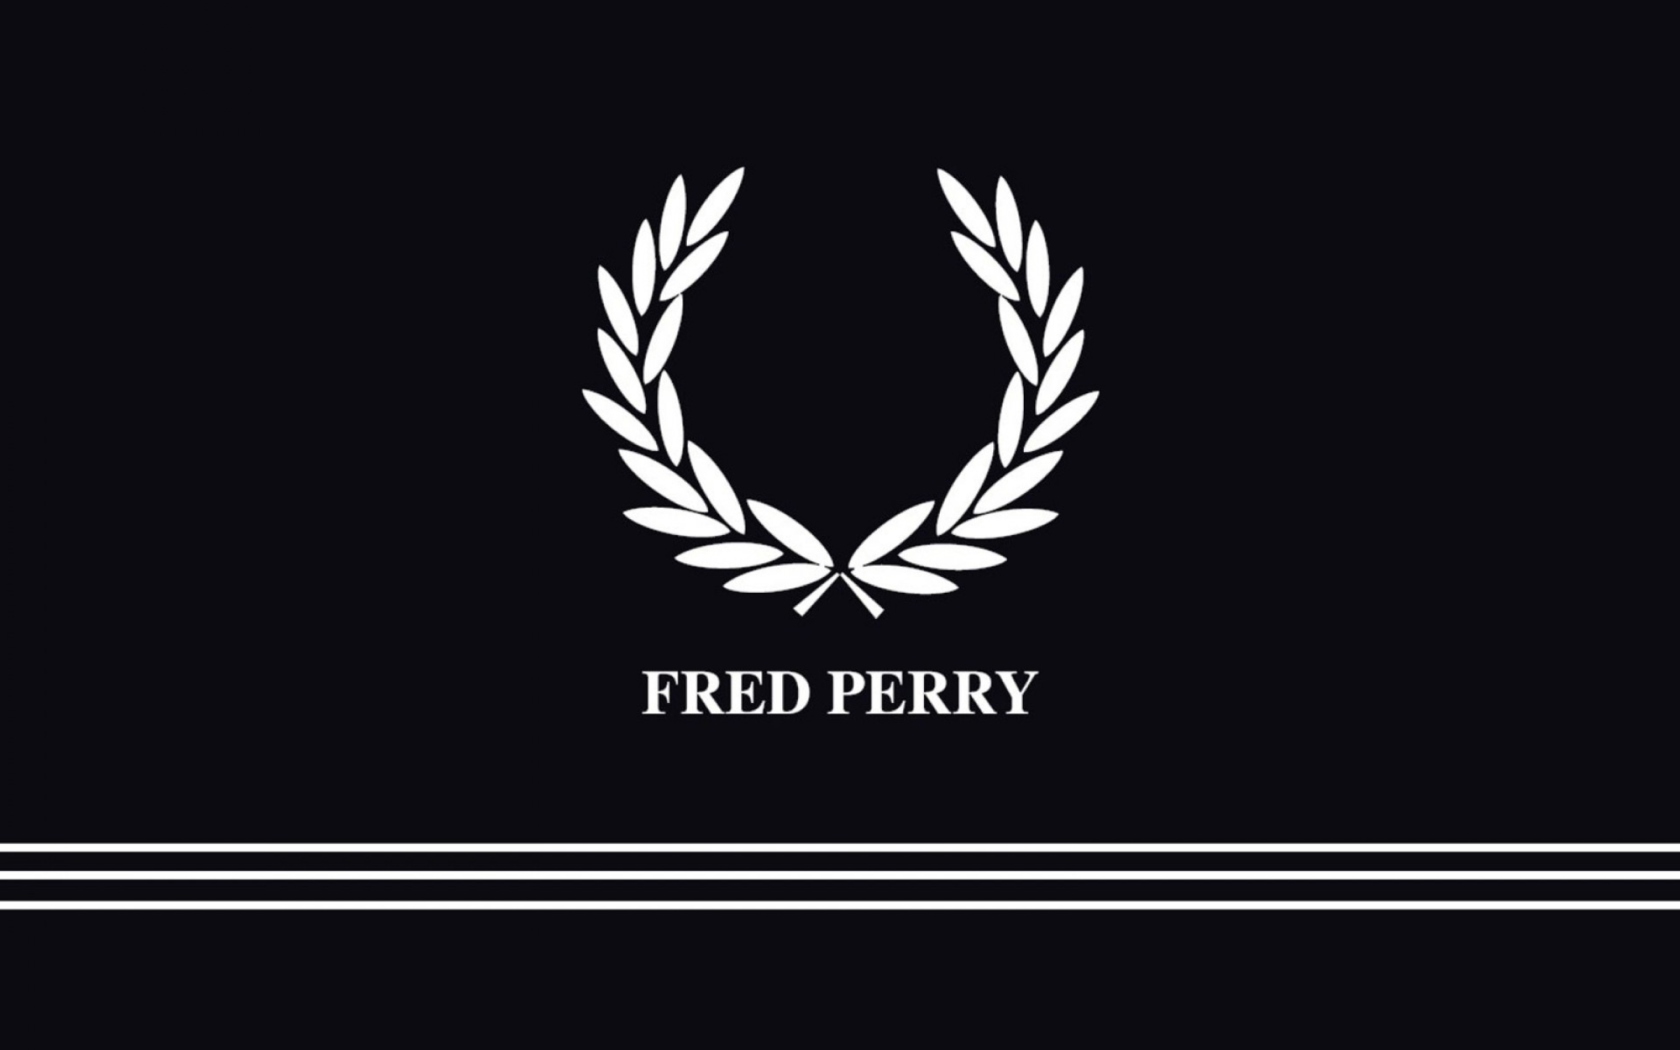 Fred Perry wallpaper 1680x1050